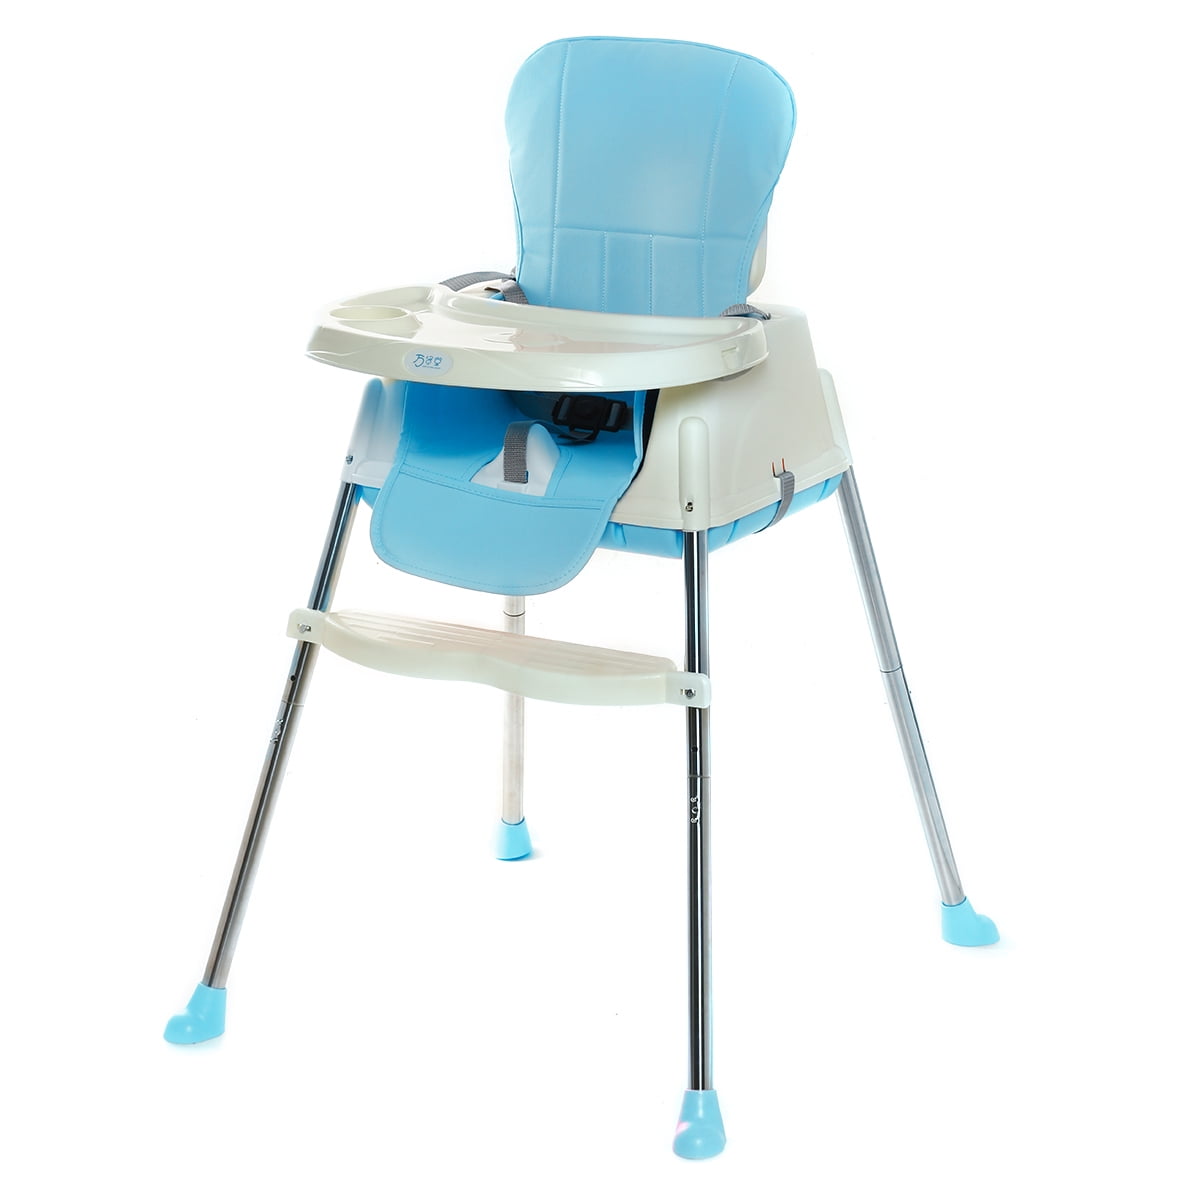 Full Size High Chair, Foldable Portable Kids Baby Toddler Kids High Chair 6 - 36 Months Whit Wheeled Seat Cushion